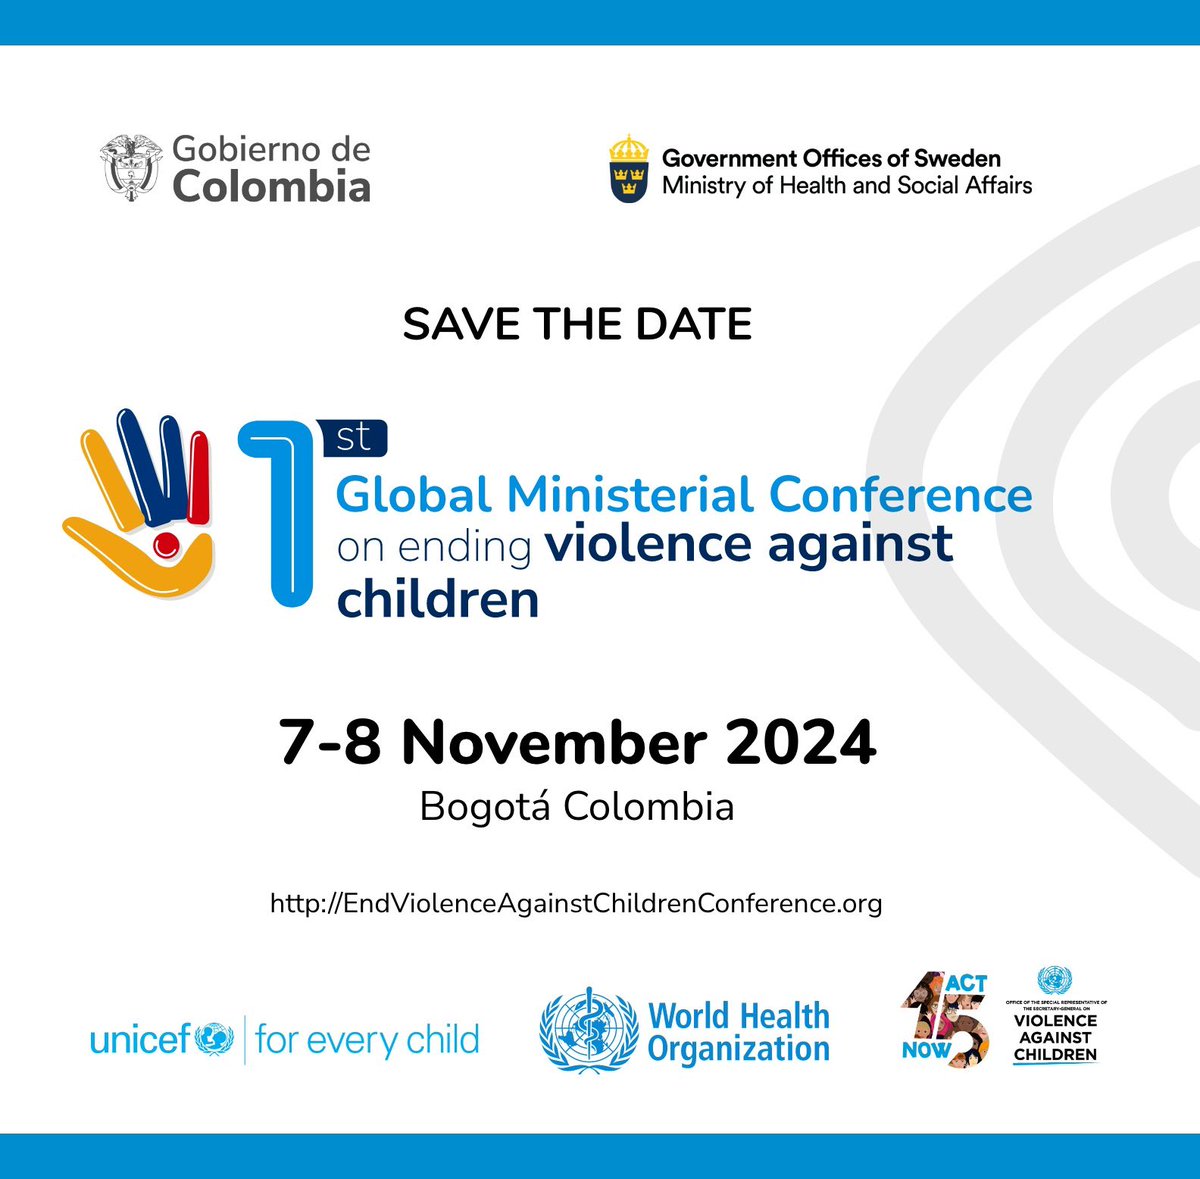 We are 7 months away from a milestone event to accelerate action to end violence against children: the 1st ever Global Ministerial Conference on Violence against Children will take place in Bogota Colombia. Attention: new dates: 7-8 November 2024